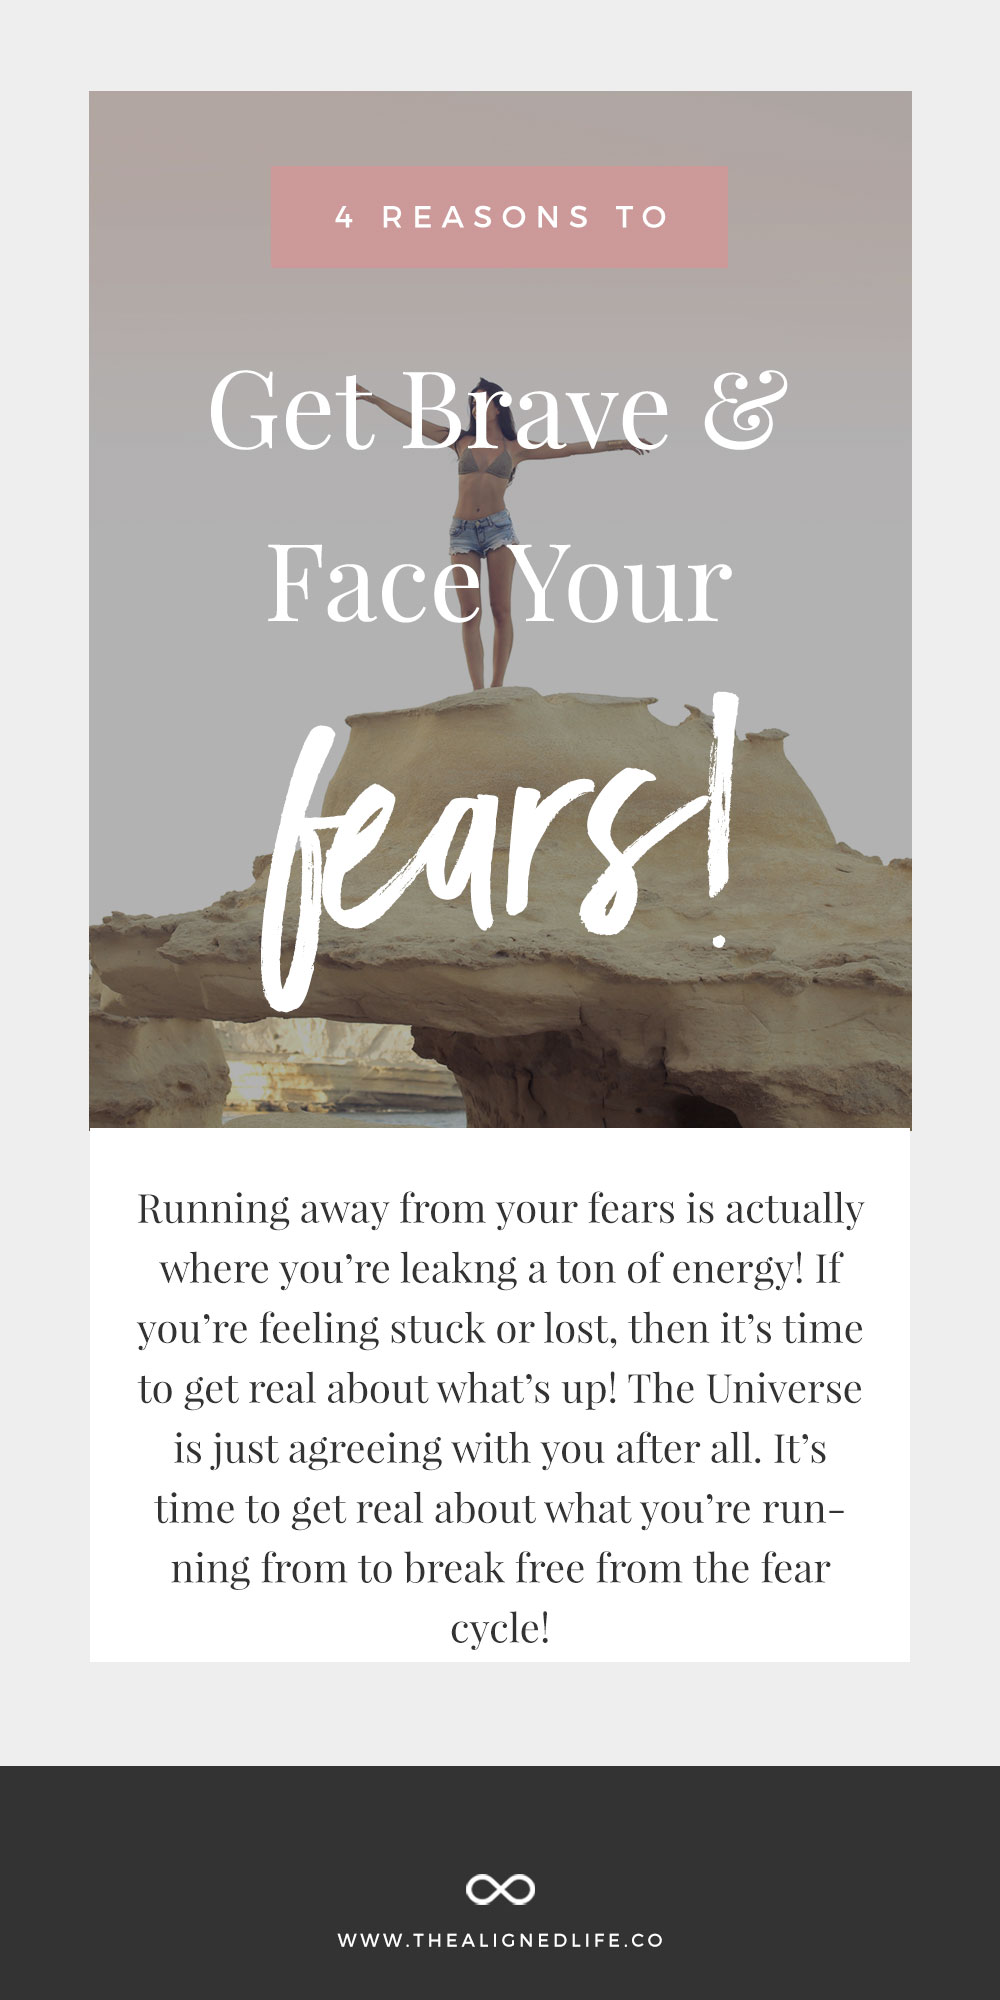 4 Reasons To Get Brave & Face Your Fears! Why Running Away Is Holding You Back